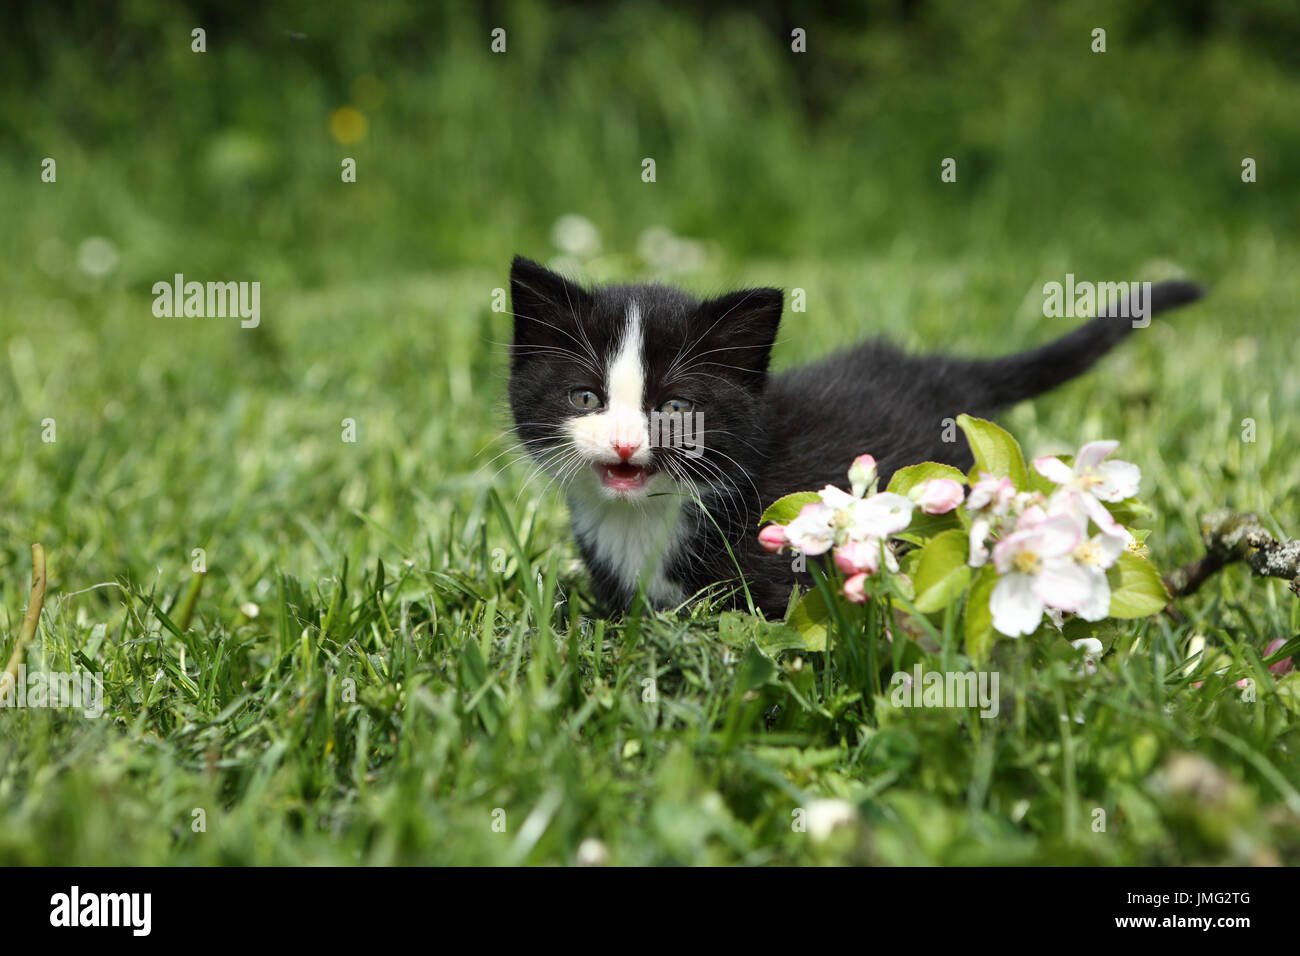 Domestic cat. Black-and-white kitten (6 weeks old) standing in grass next to apple blossoms, meowing. Germany Stock Photo